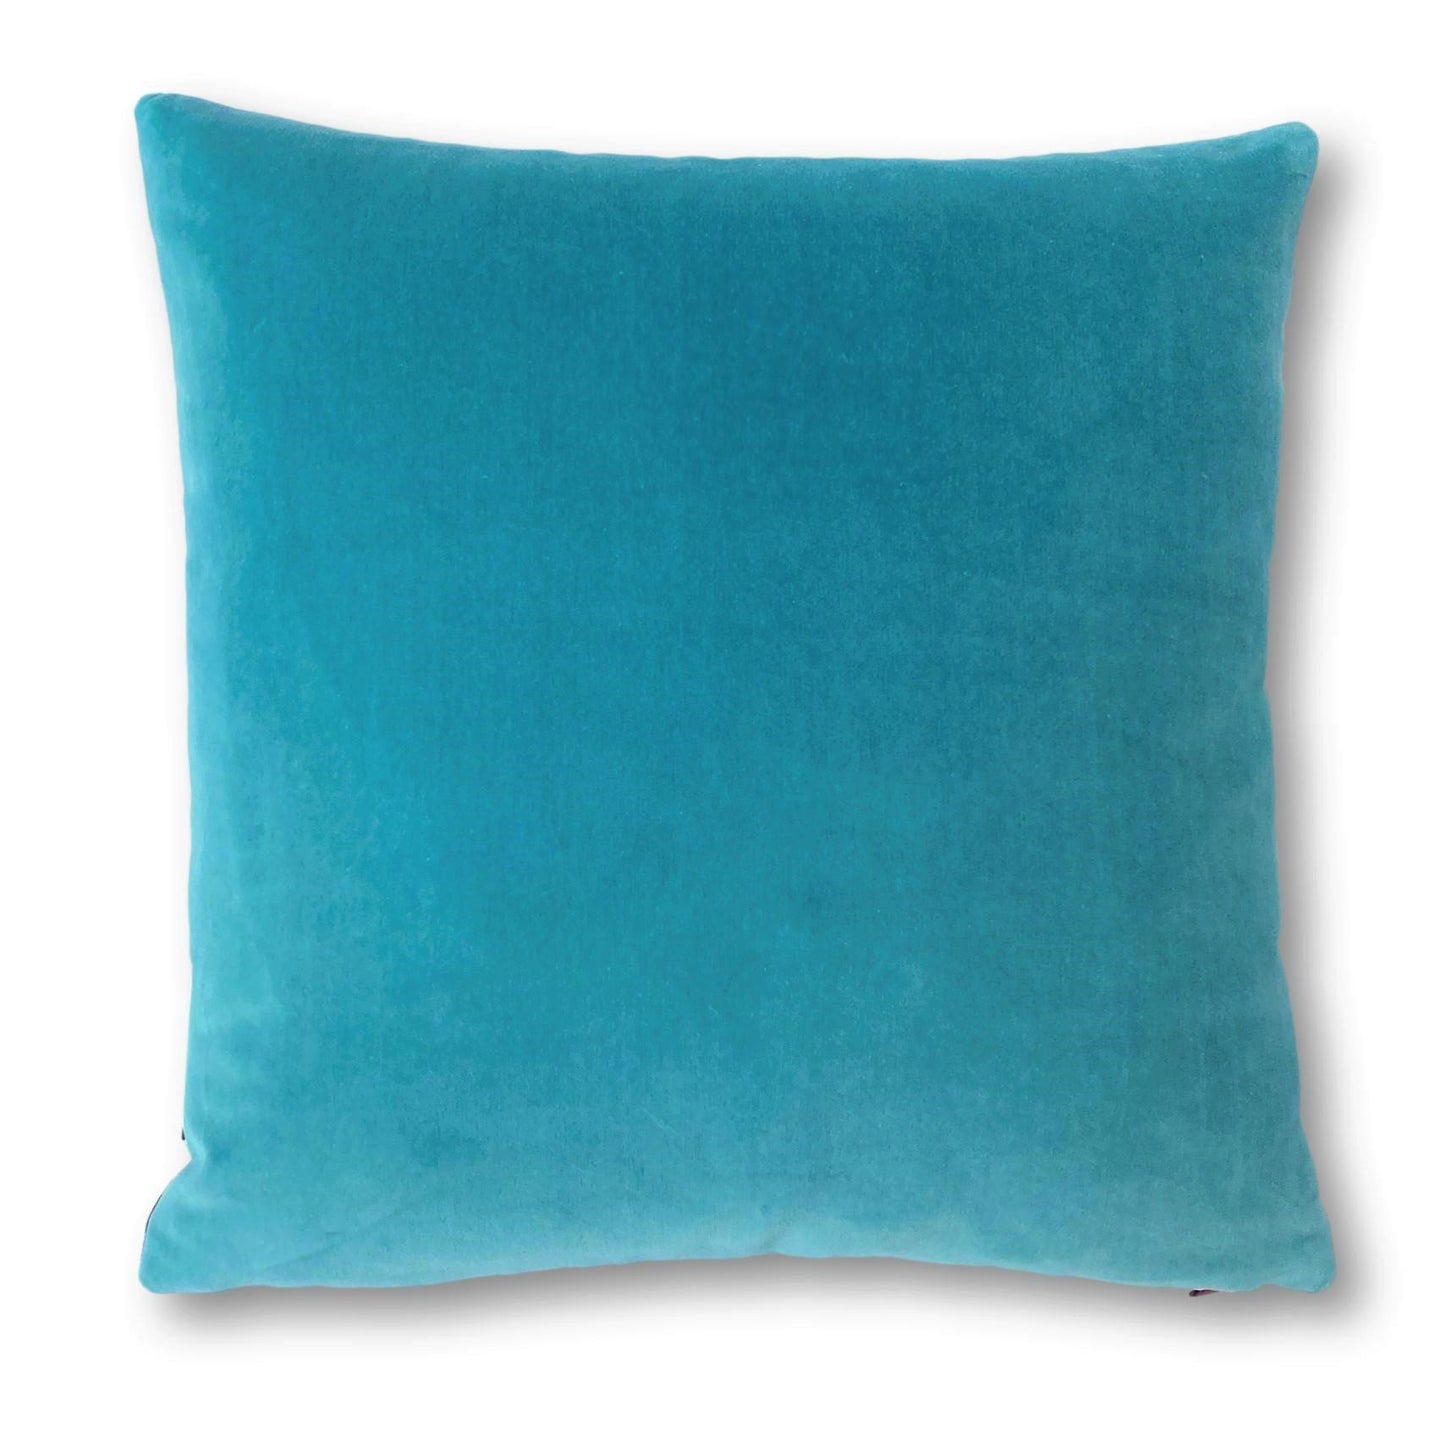 Turquoise Velvet Cushion Cover with Teal